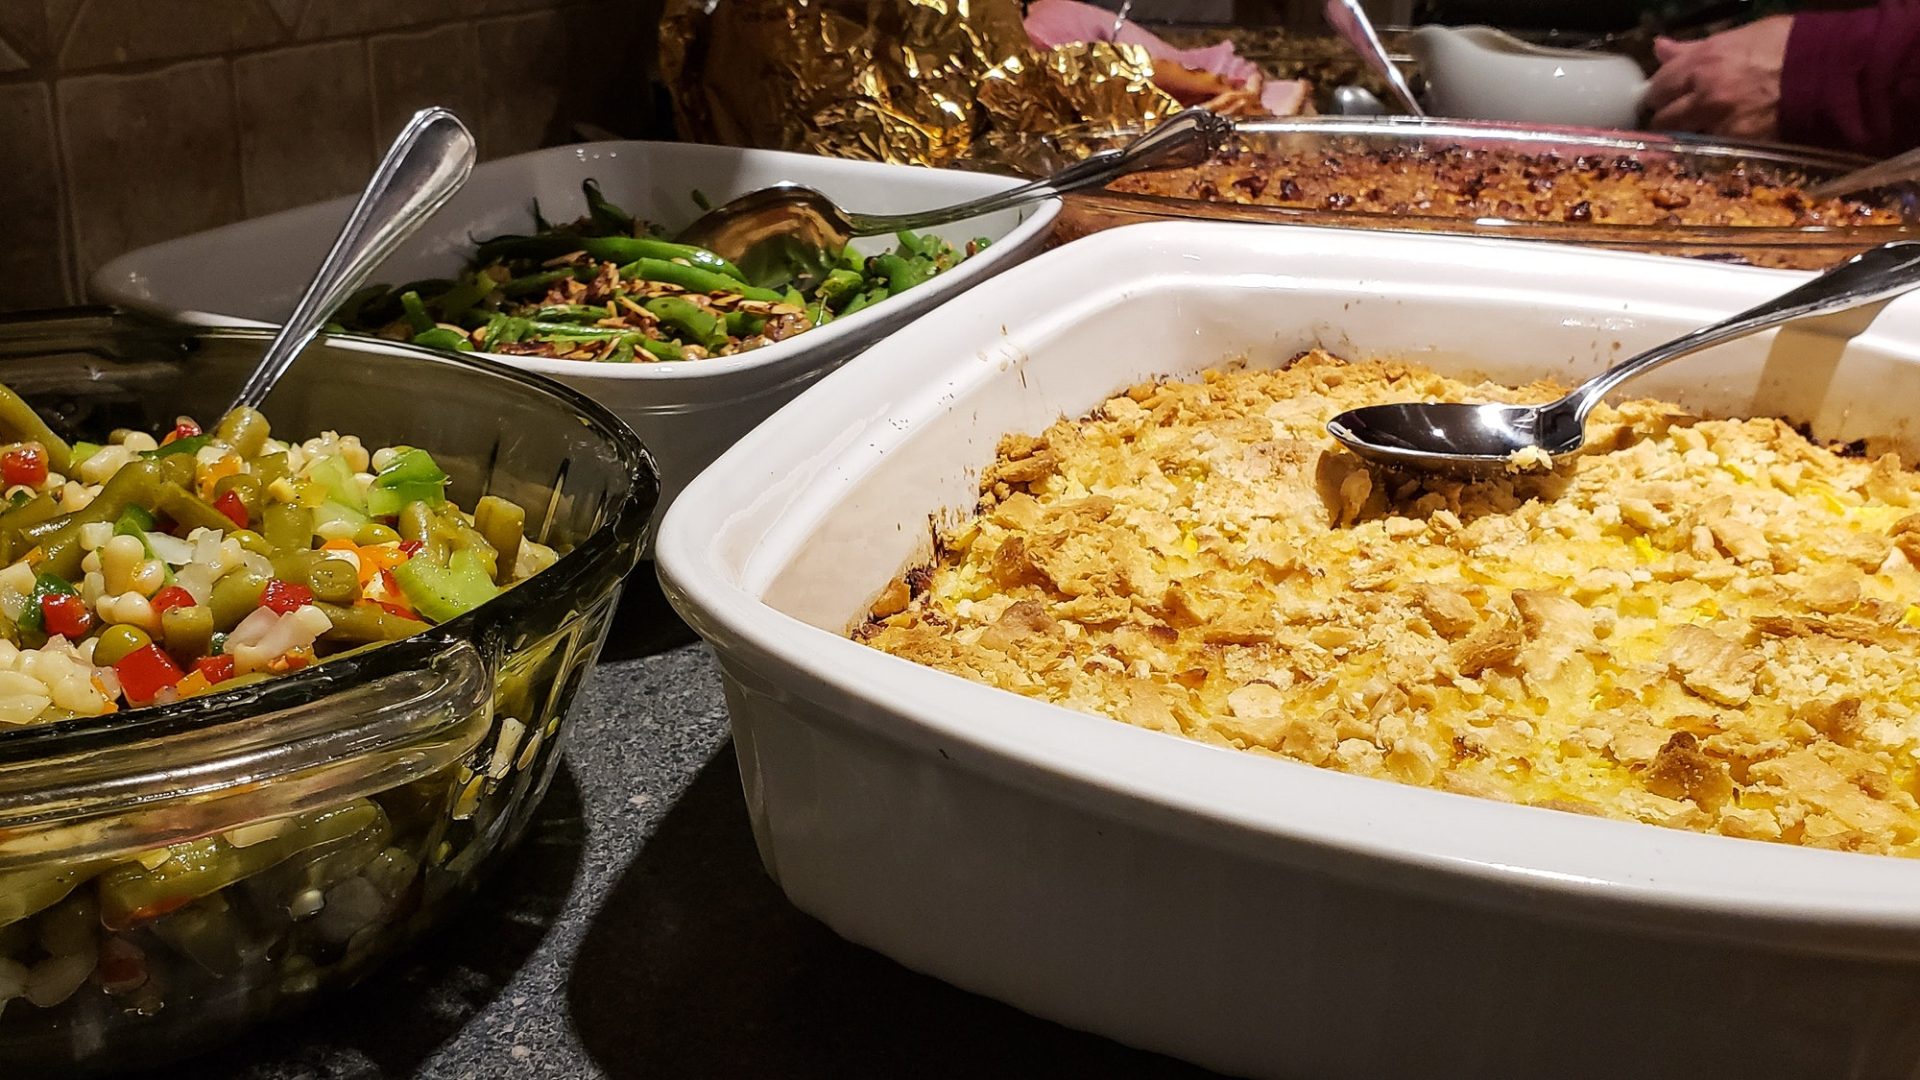 Thanksgiving dinner served at holiday dinner party featuring fall foods with casseroles.